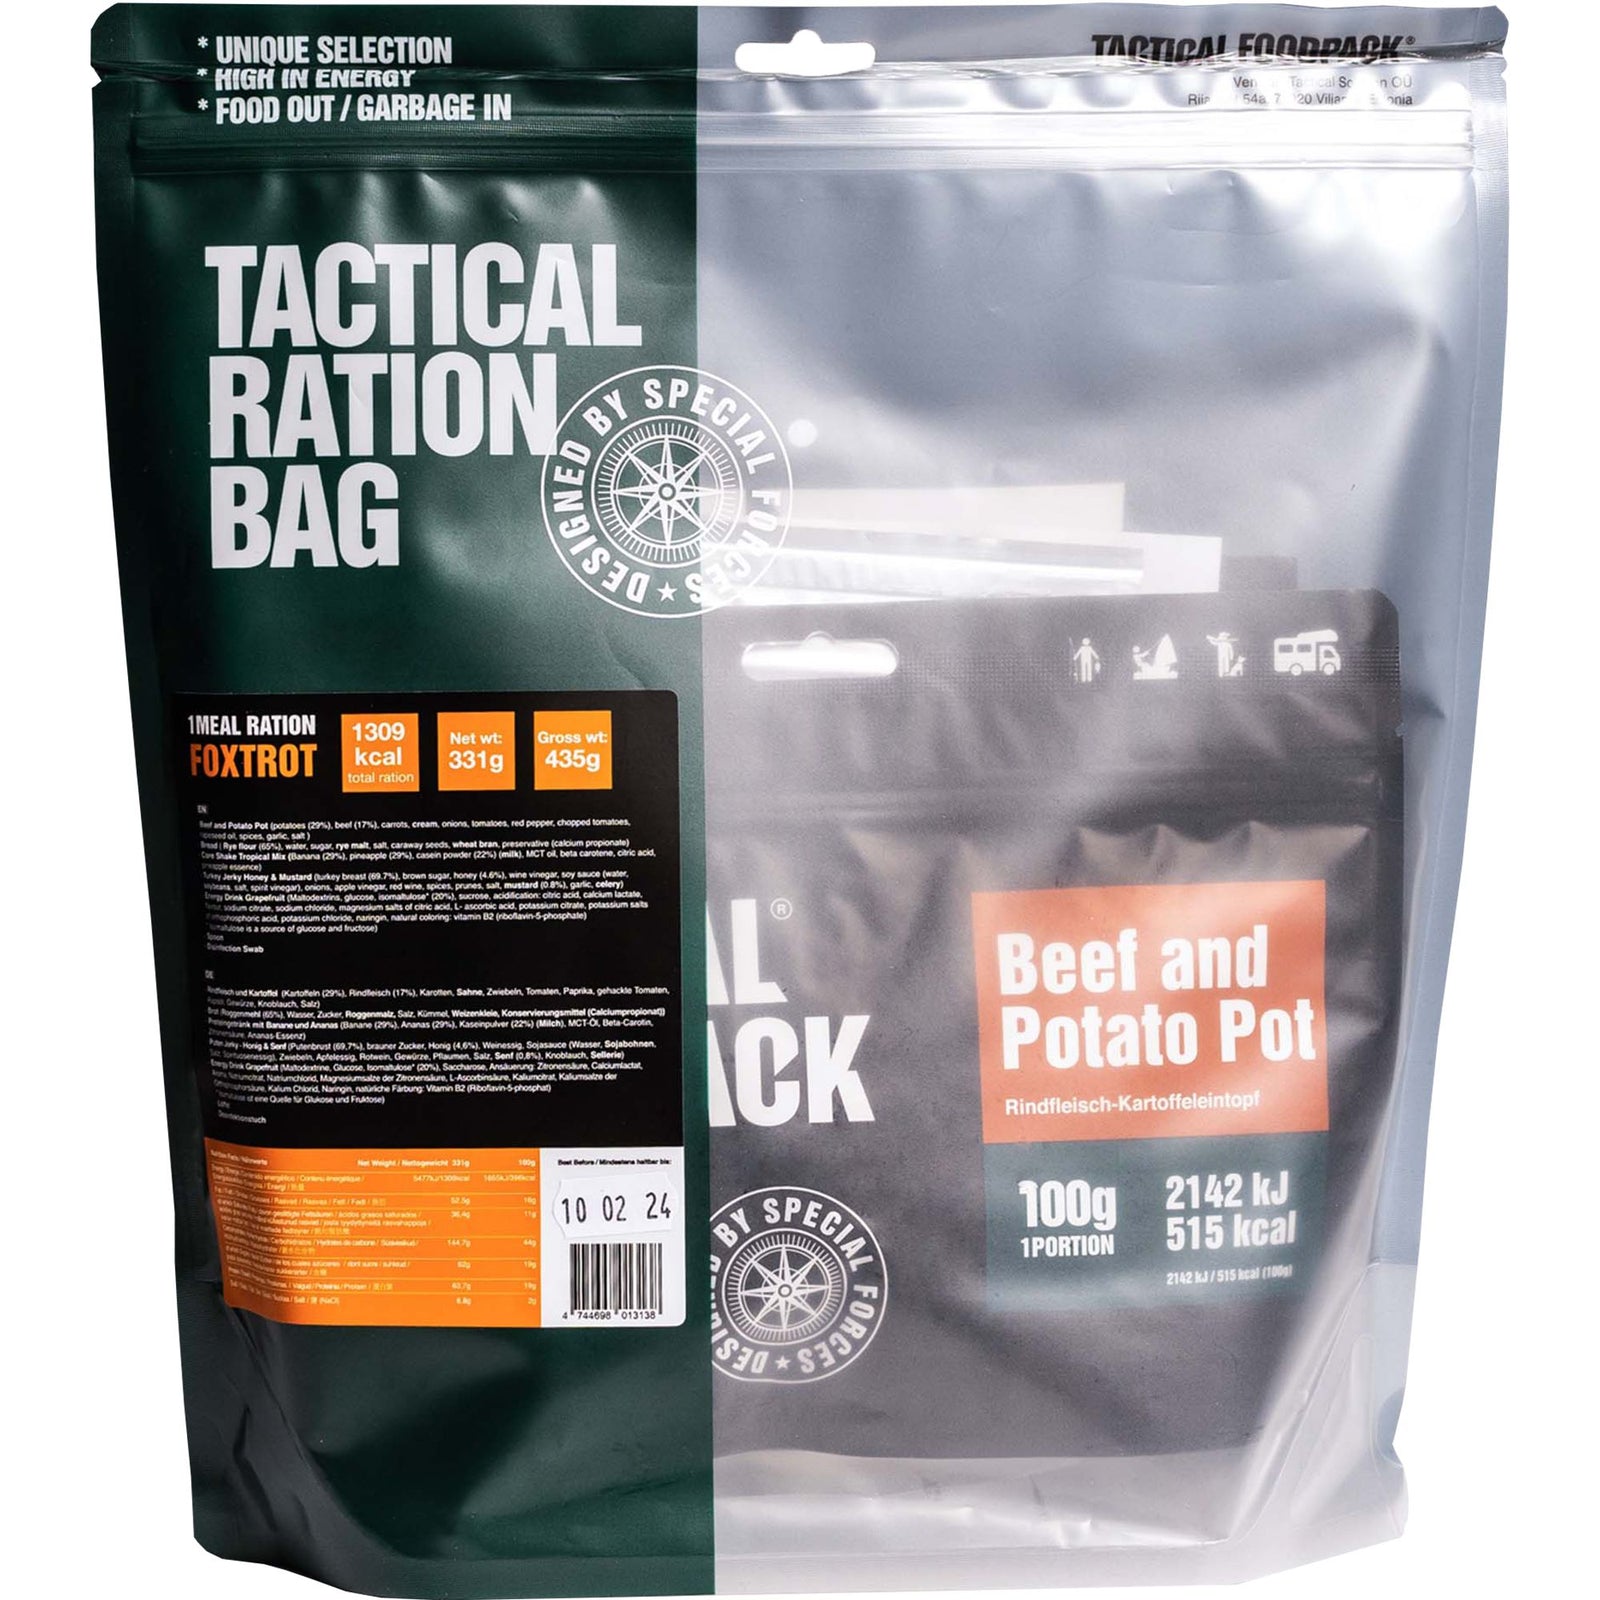 Tactical Foodpack | 1 Meal Ration FOXTROT 331g